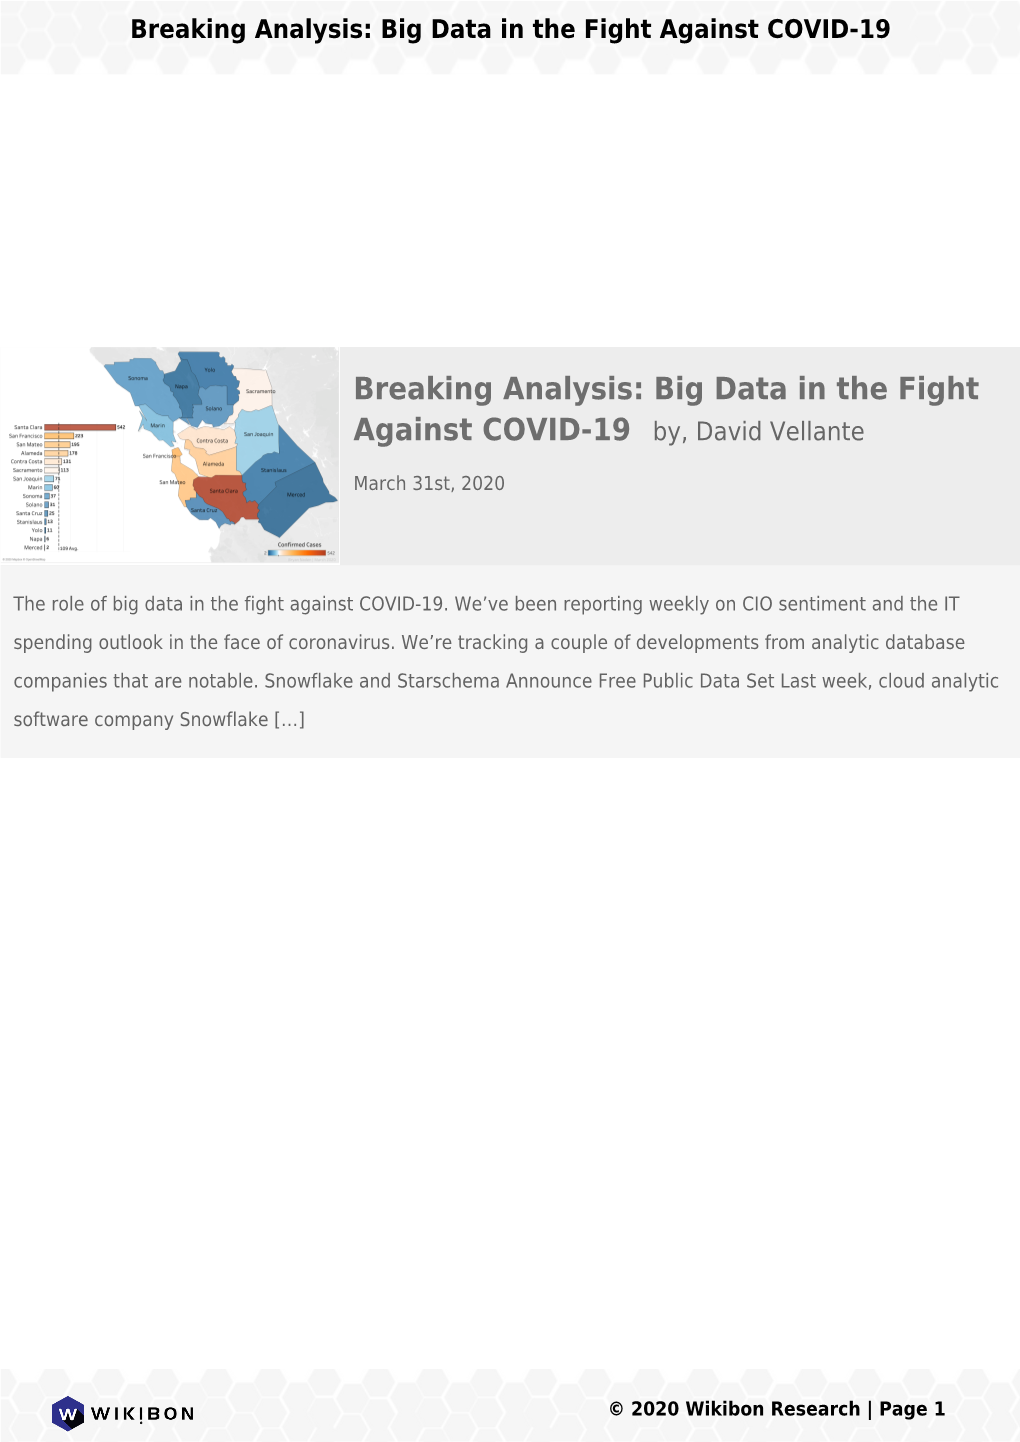 Breaking Analysis: Big Data in the Fight Against COVID-19